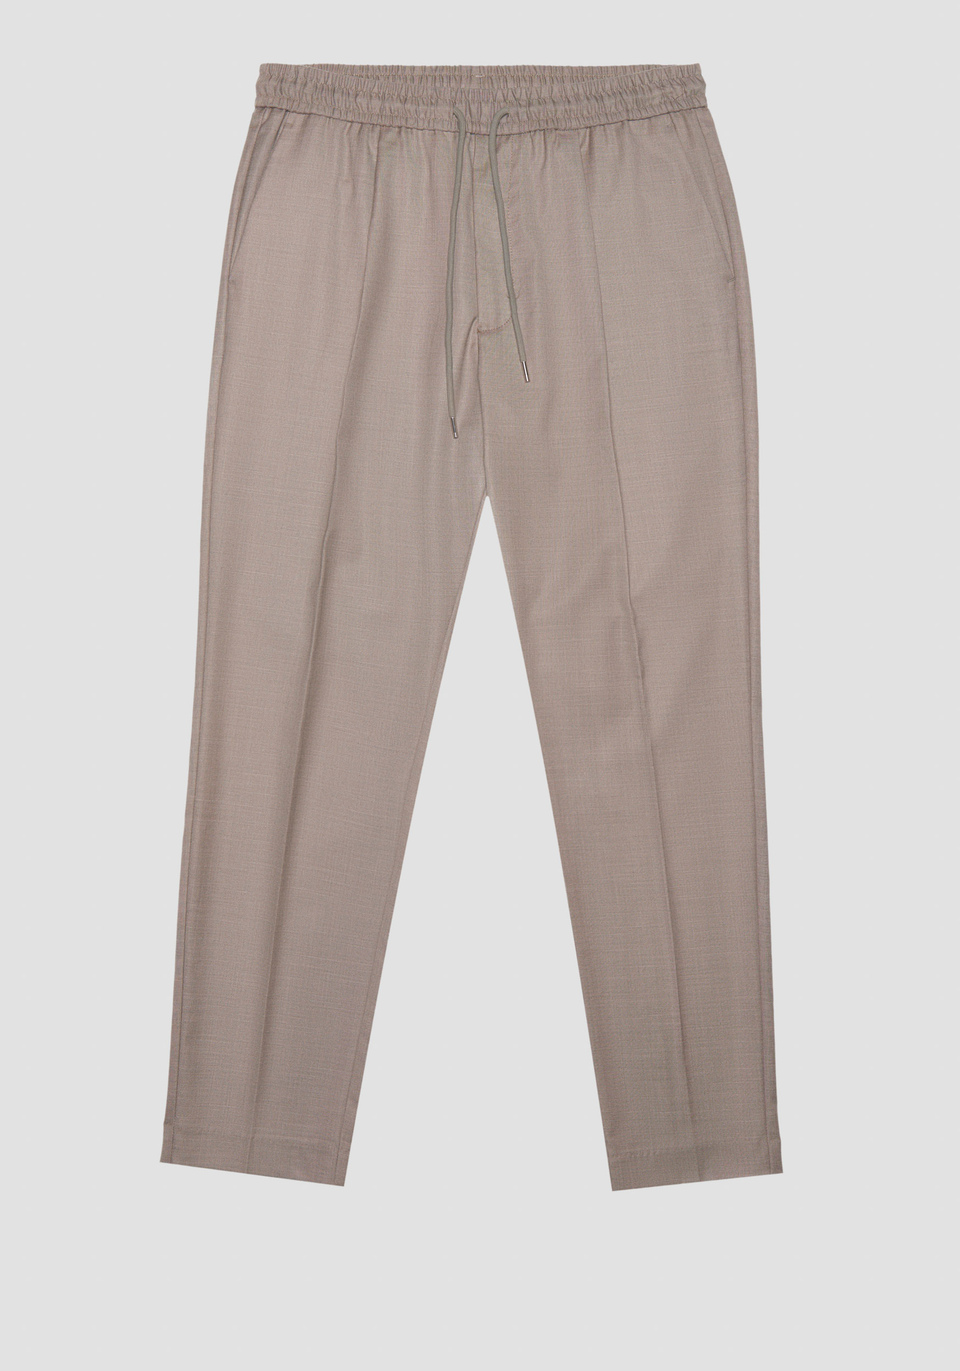 "NEIL" REGULAR FIT TROUSERS IN FLAMED ELASTIC VISCOSE BLEND FABRIC - Antony Morato Online Shop